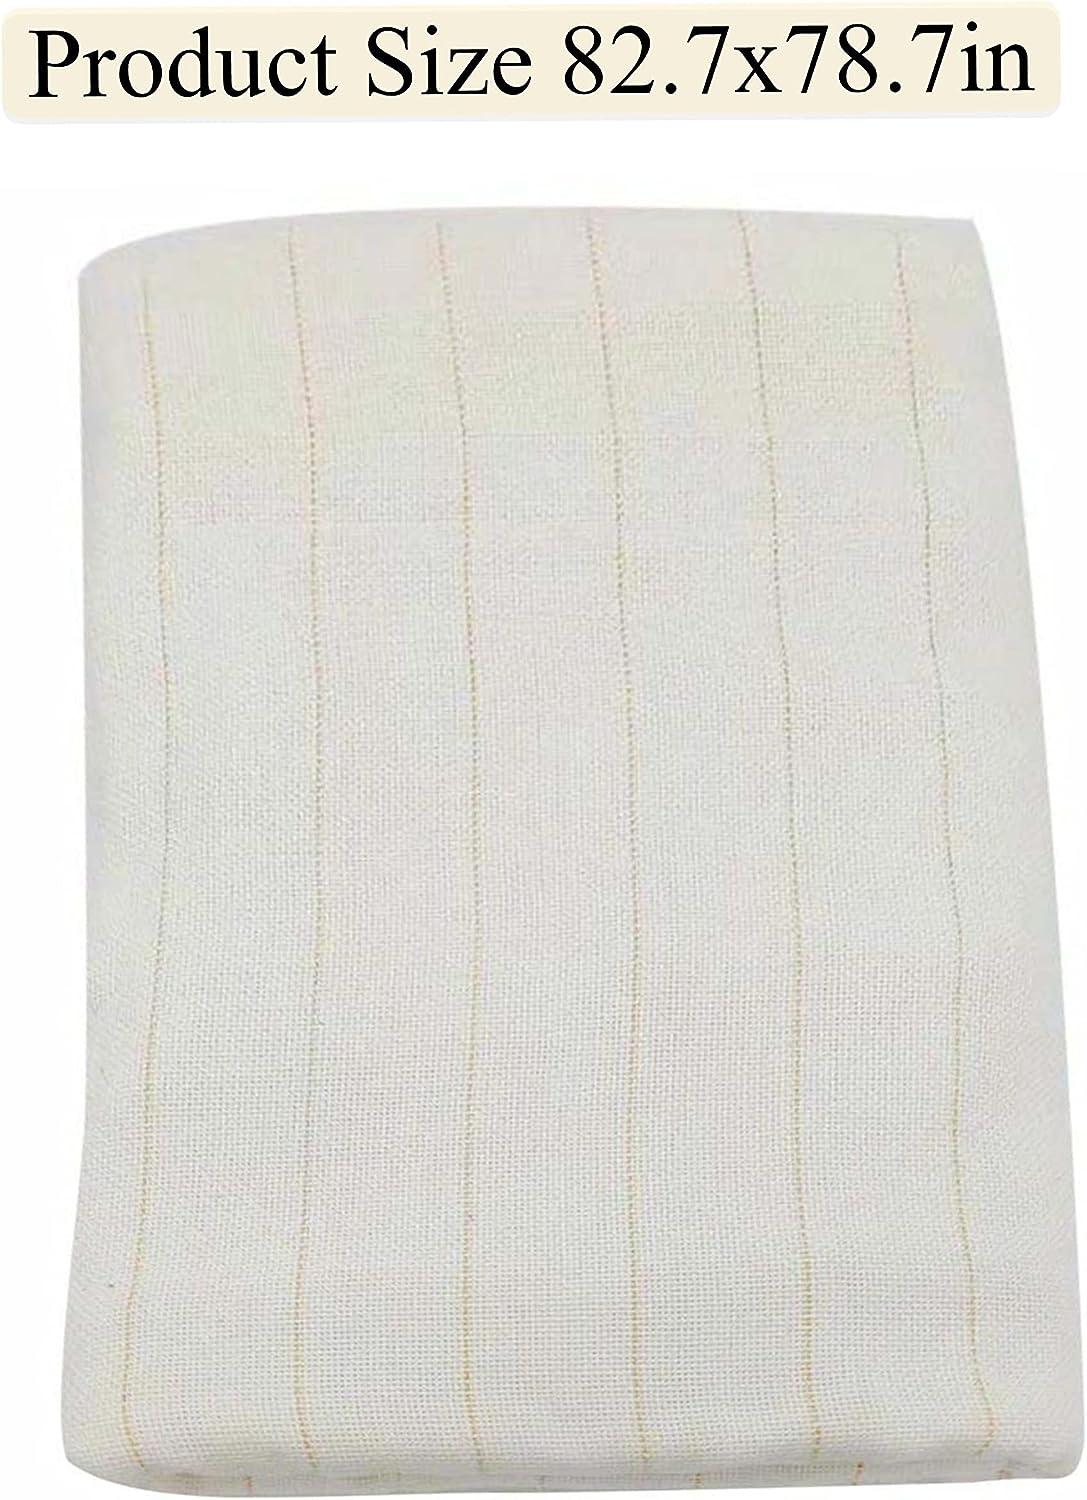 82.7x78.7in Large Size Primary Tufting Cloth with Marked Lines, Premium  Monks Cloth Punch Needle Cloth Fabric for Tufting Gun, Rug-Punch, Punch